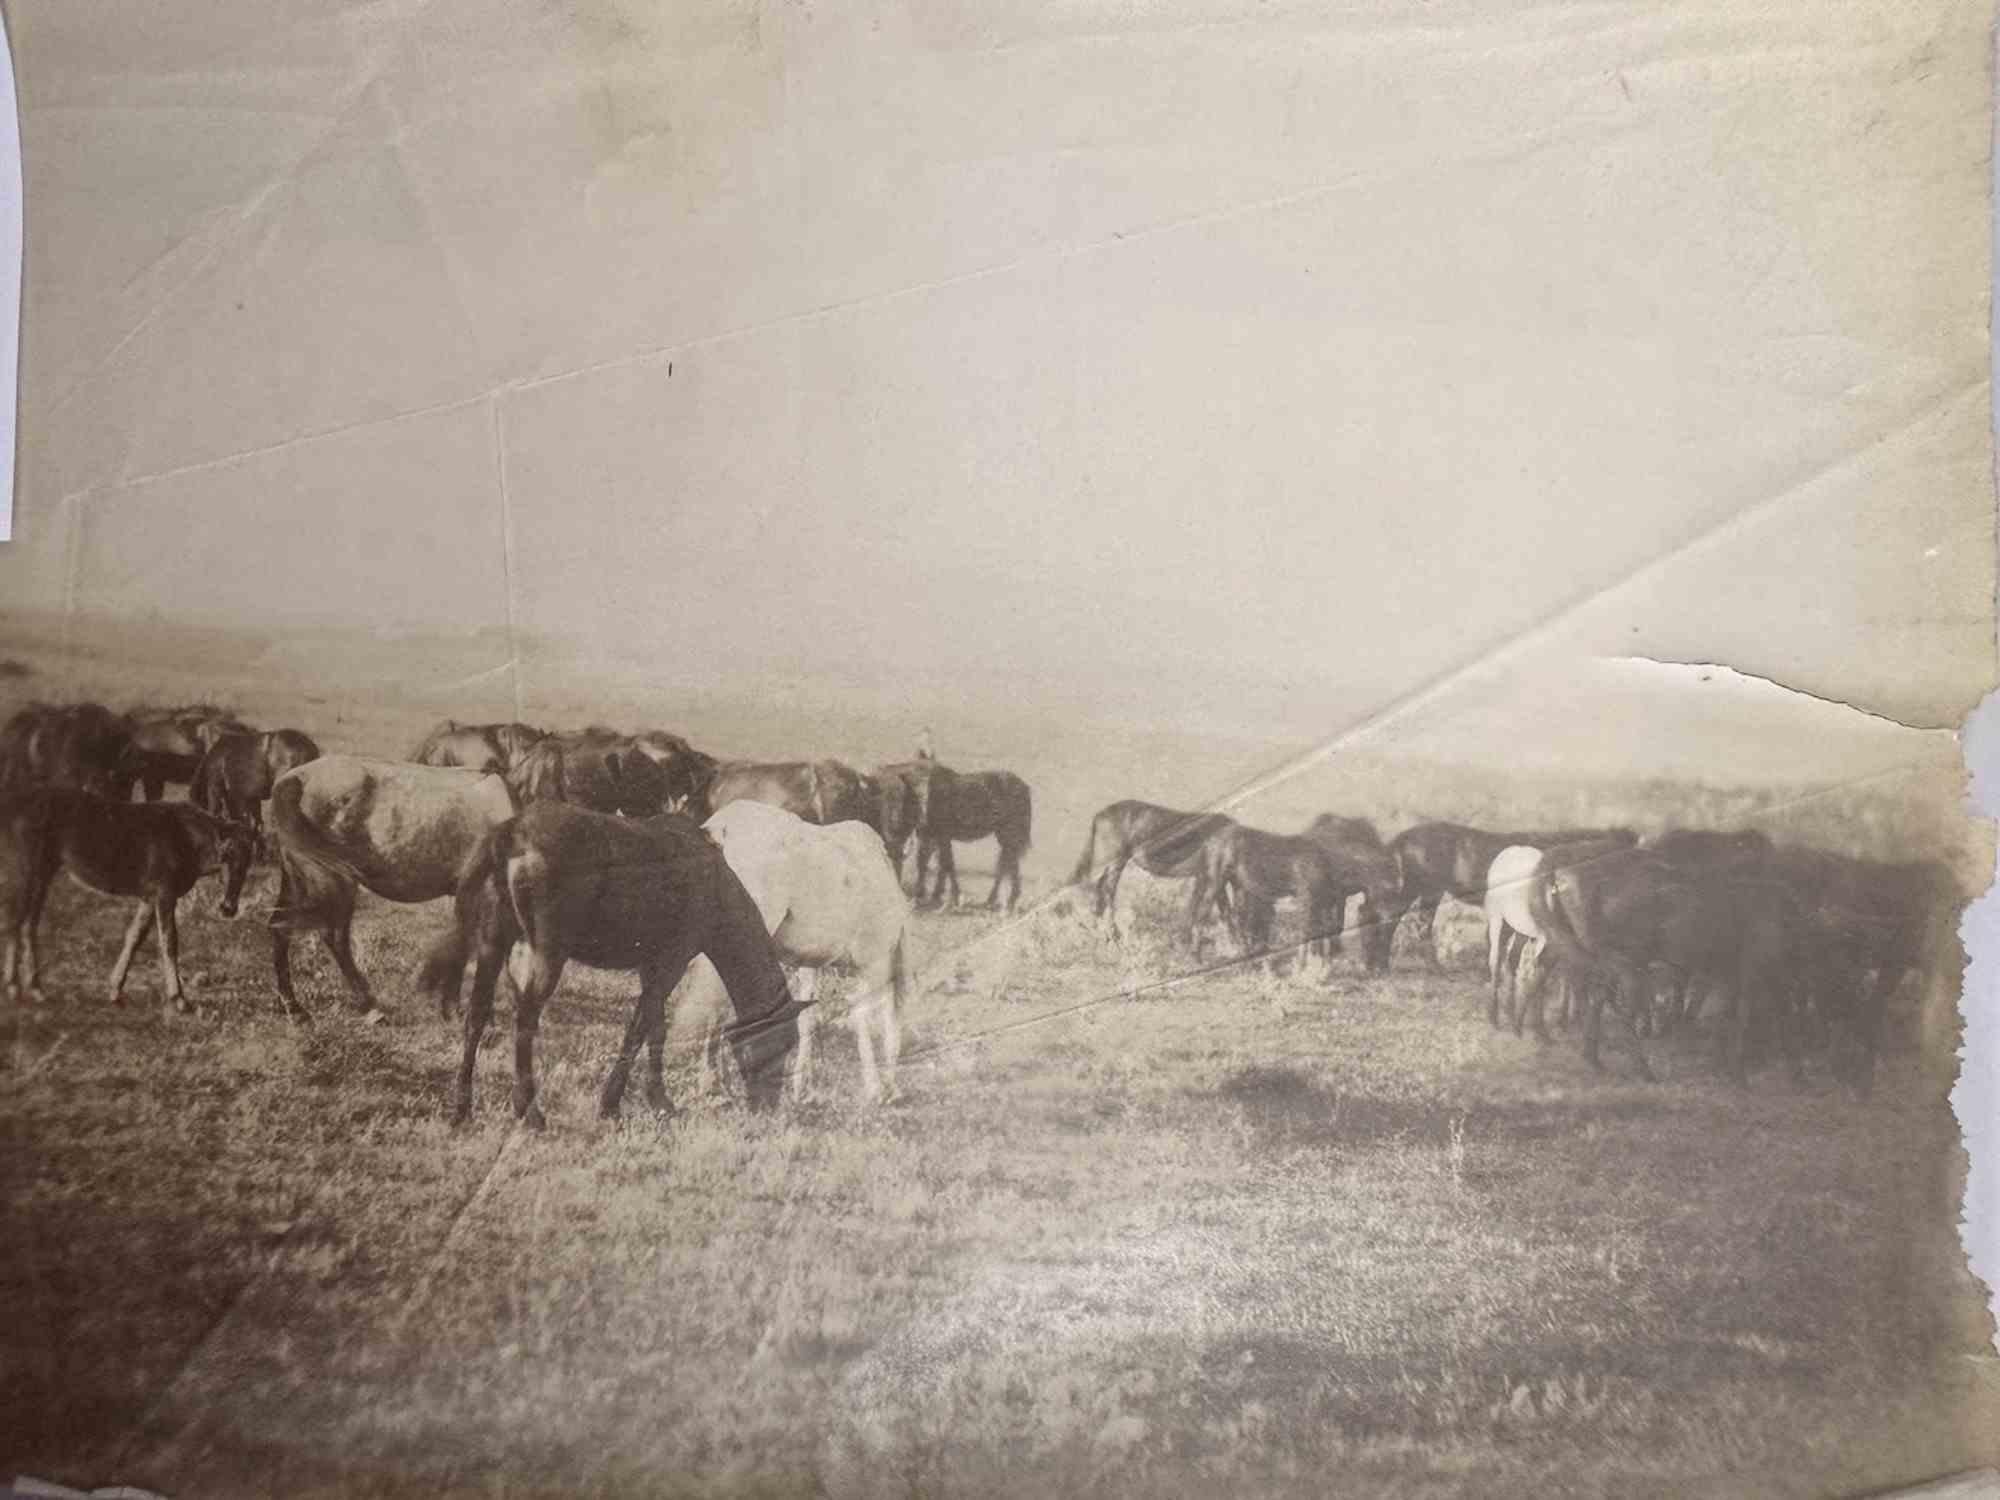 Old Days - Horses in the Tuscan Maremma - Vintage Photo - Mid-20th Century